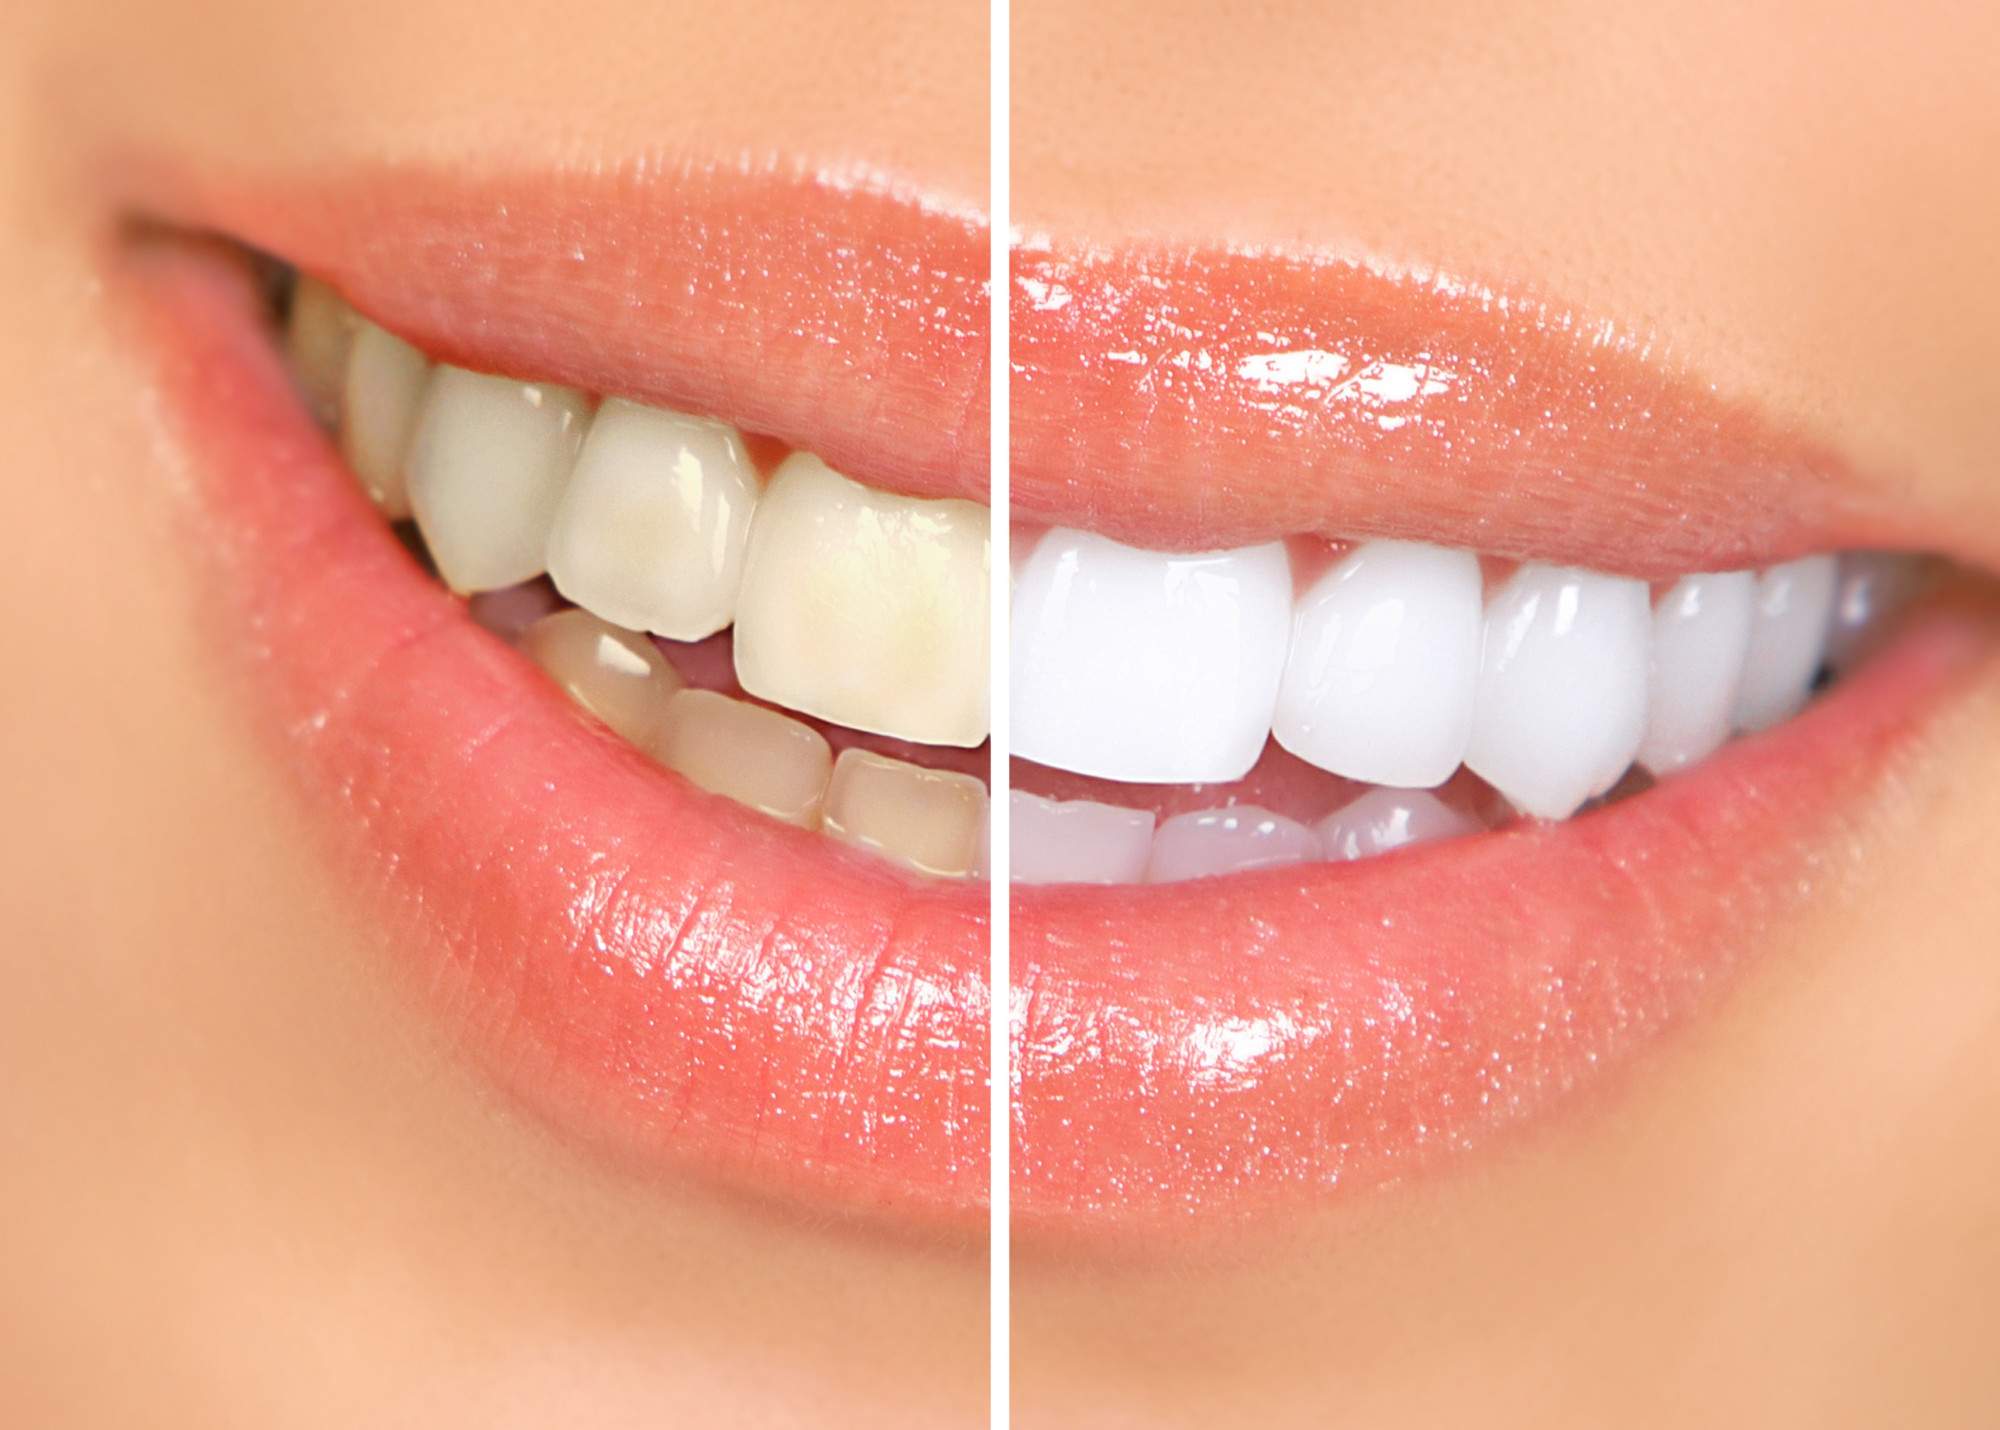 What Causes Brown Spots and Stains on Teeth?